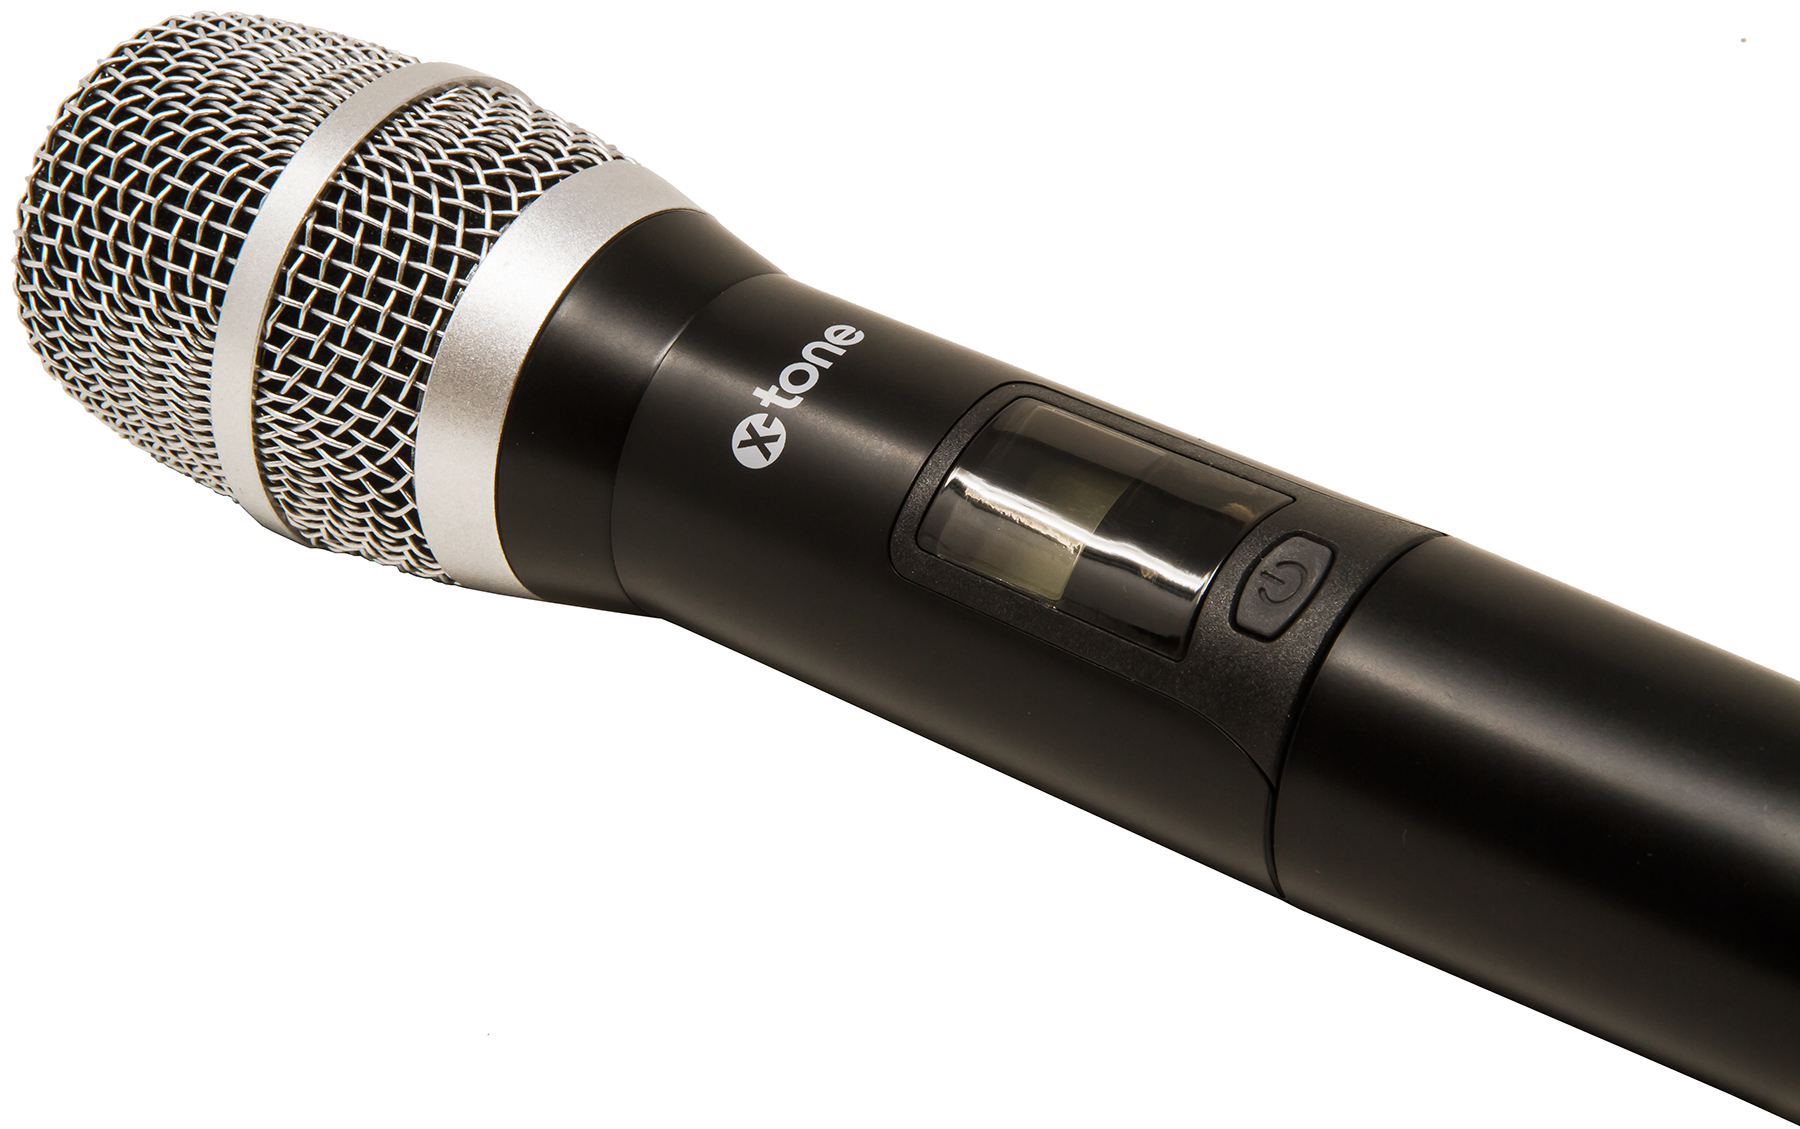 X-tone Xhf100 Systeme Hf Main Frequence Fixe - Wireless handheld microphone - Variation 4